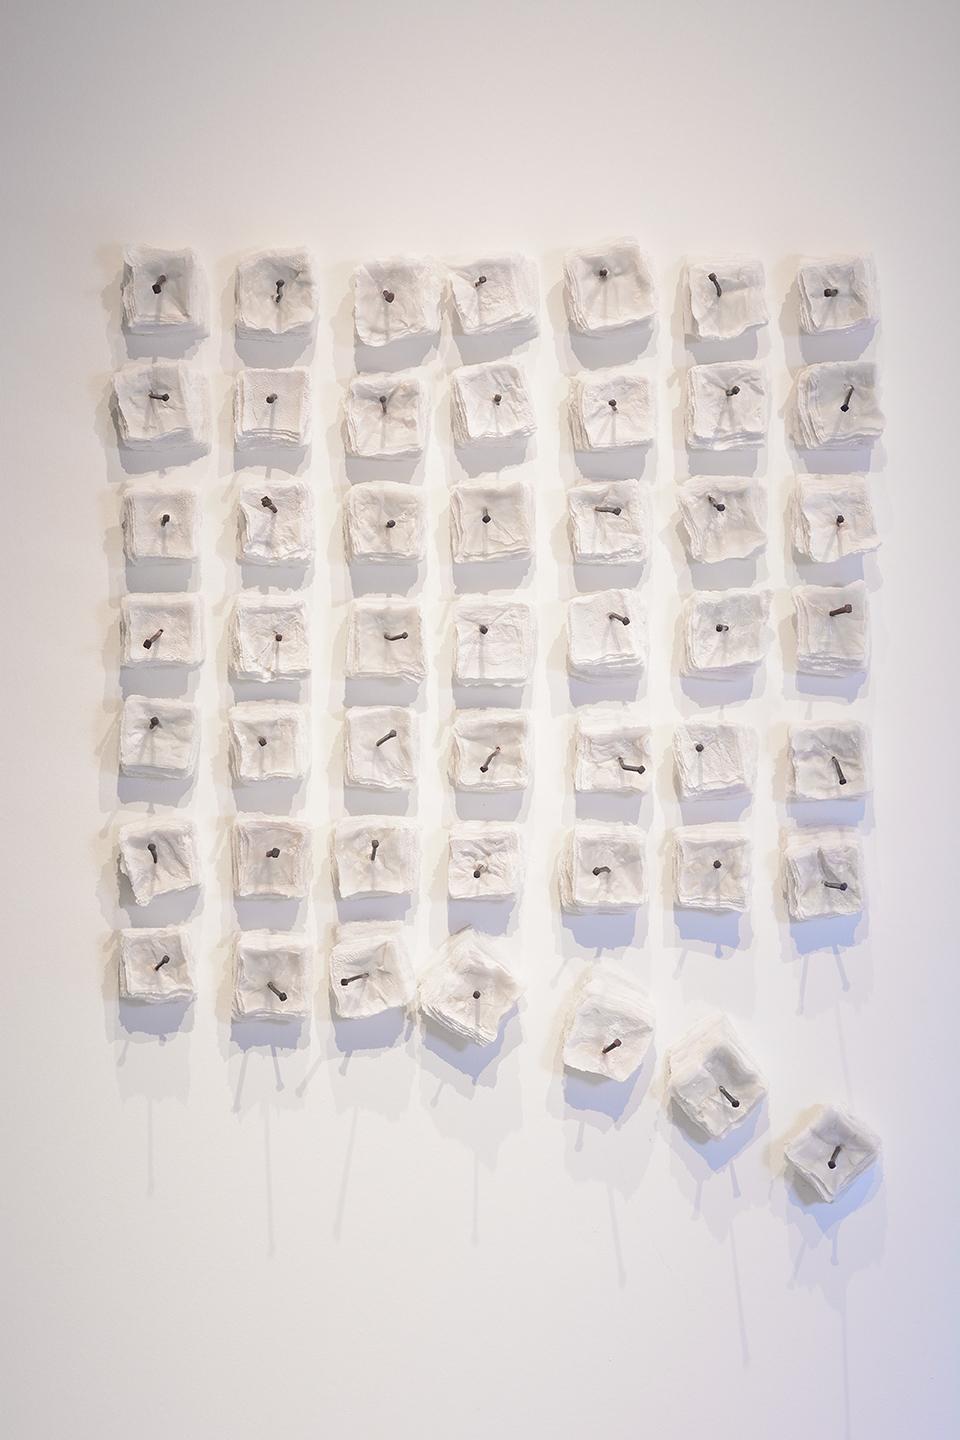 Cheryl Wilson Smith Abstract Sculpture - Promises and Lies: Keeping Score -  white grid glass frit wall sculpture